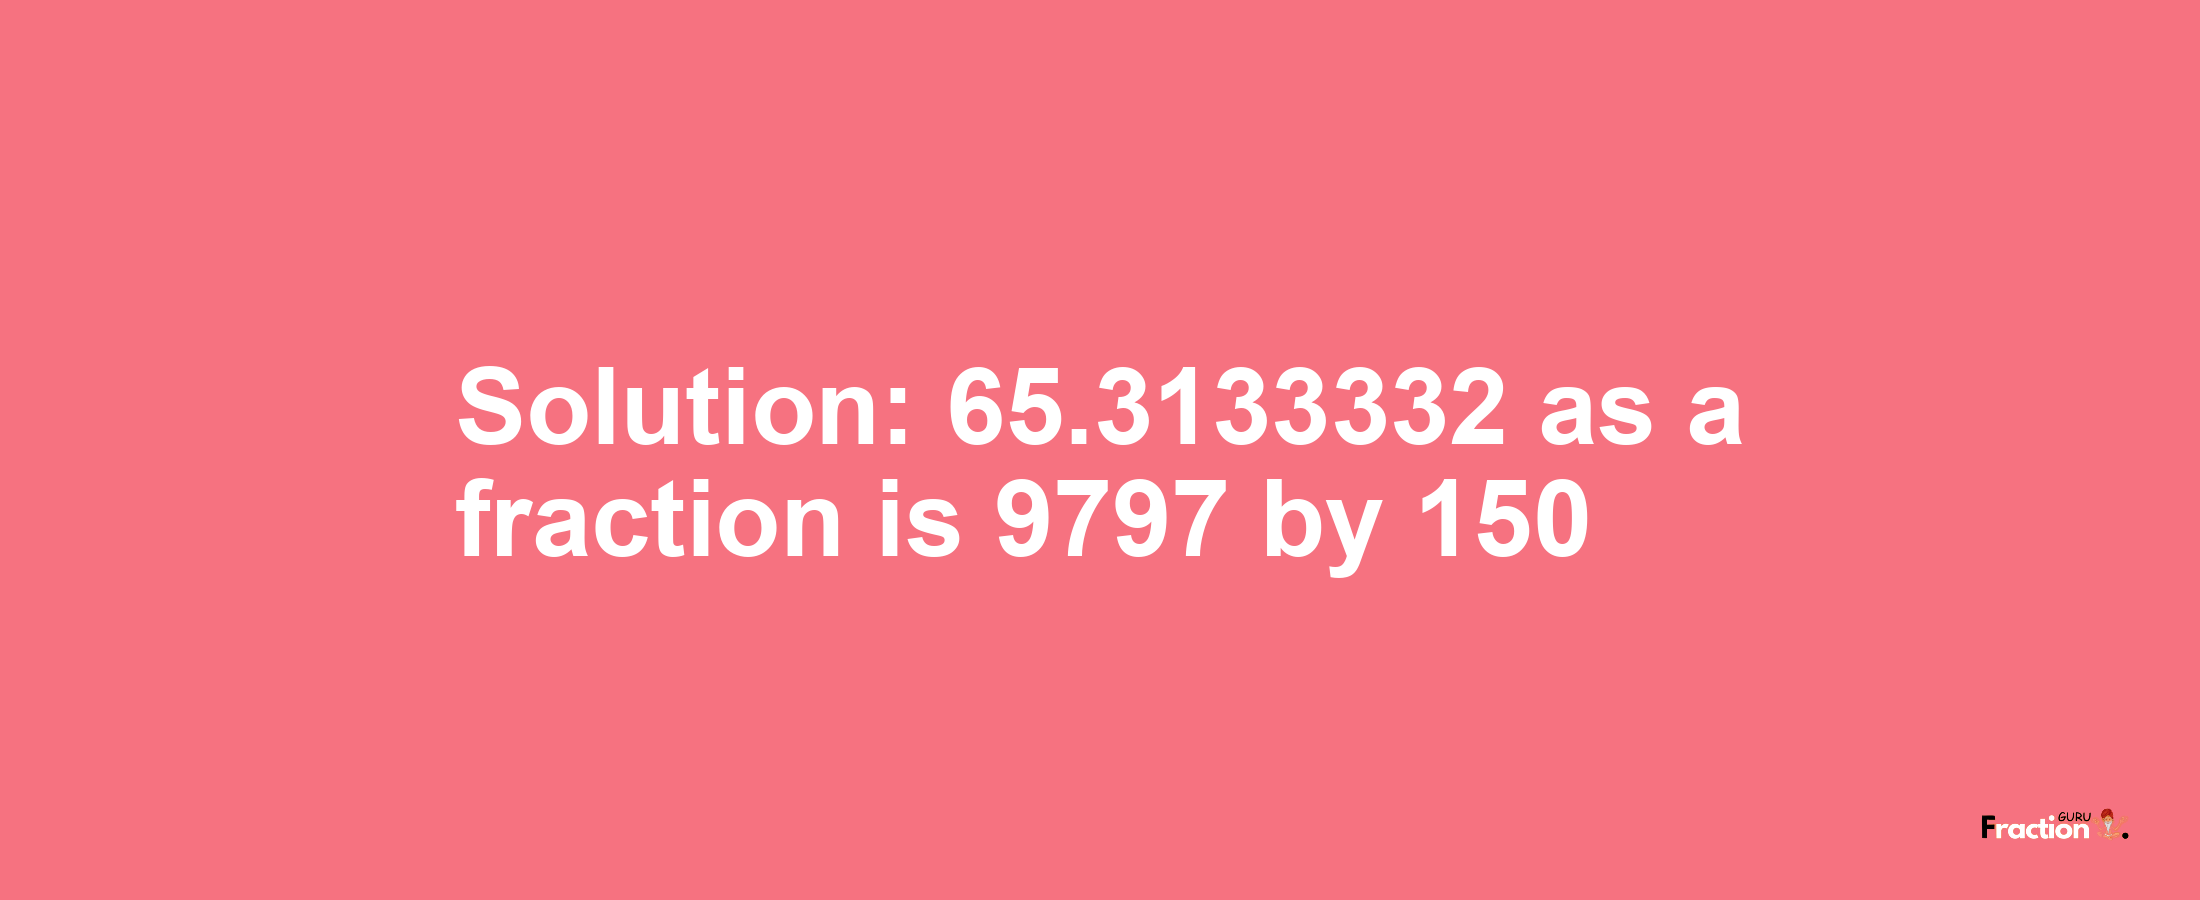 Solution:65.3133332 as a fraction is 9797/150